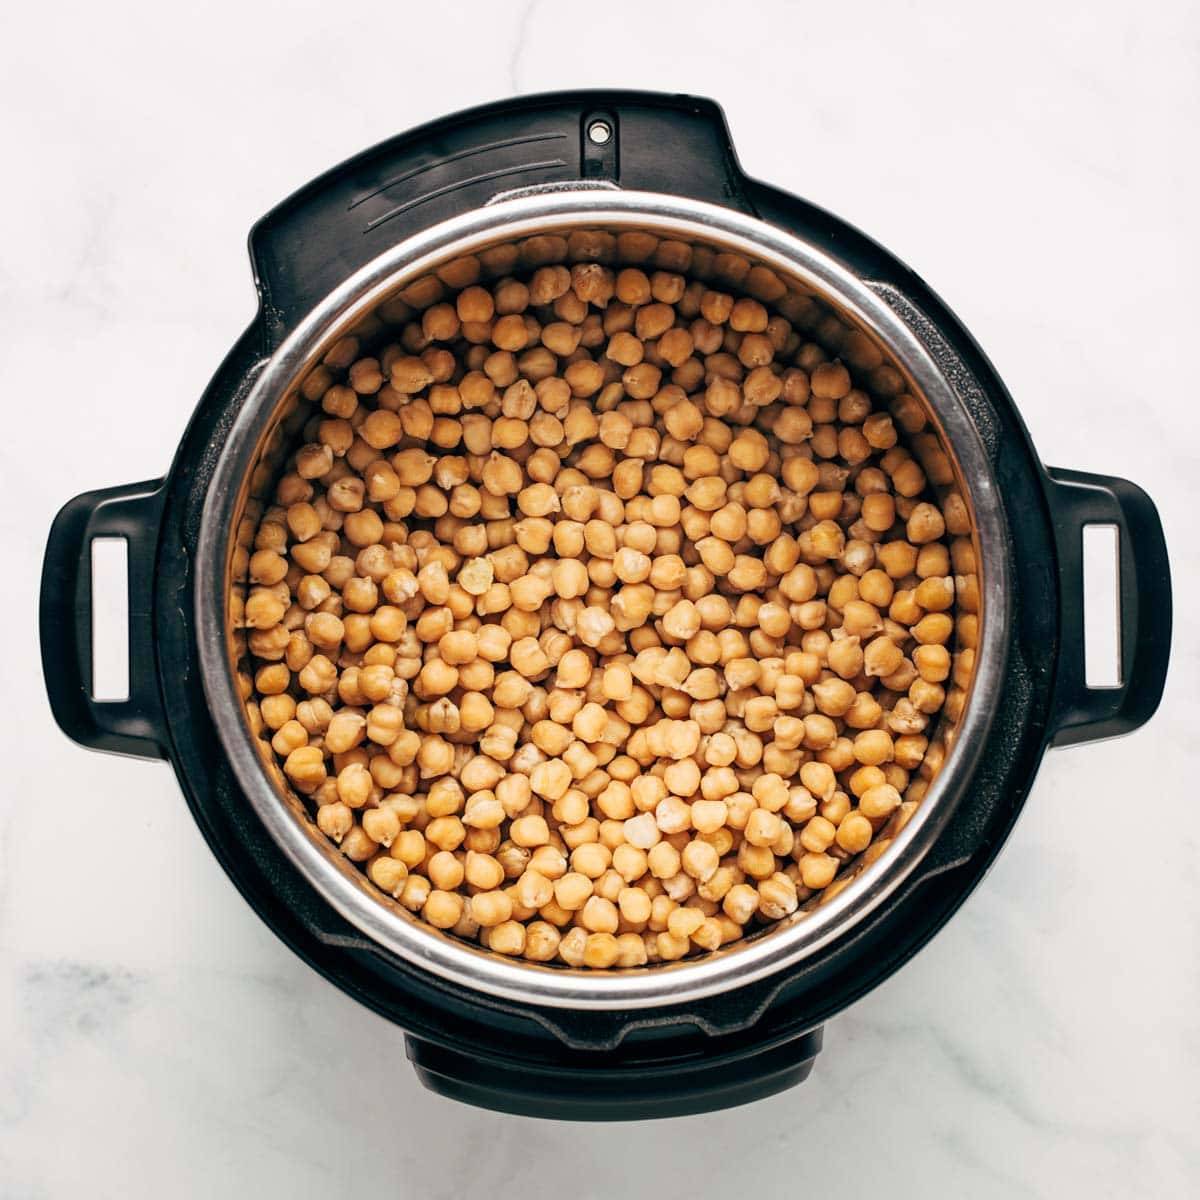 Chickpeas in the Instant Pot.